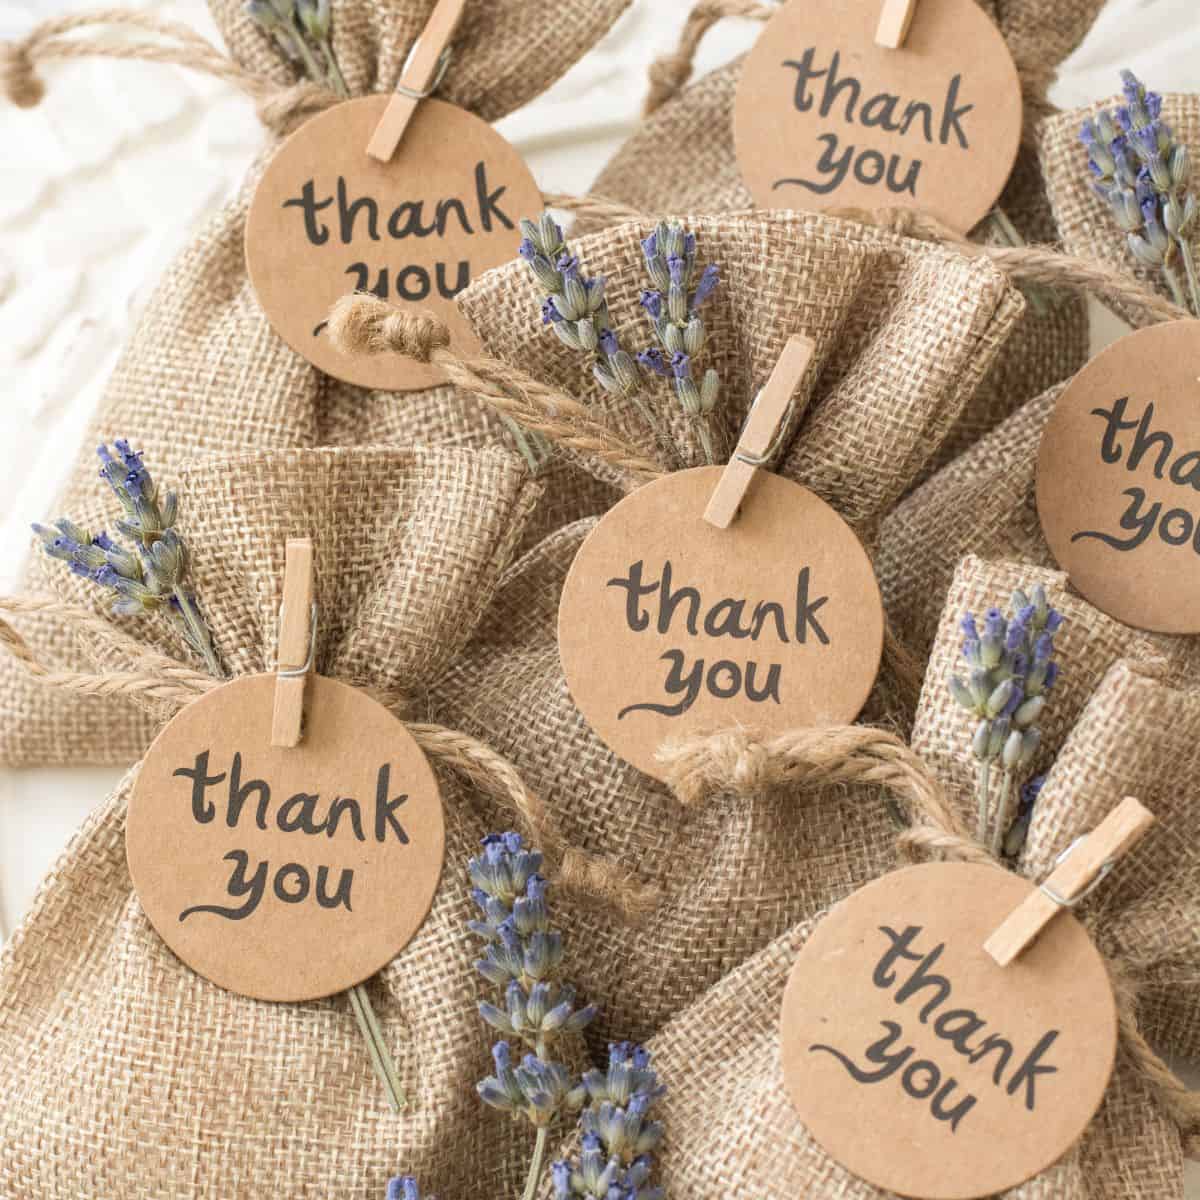 Small cloth bags with a tag saying thank you pinned to it with clothes pins.